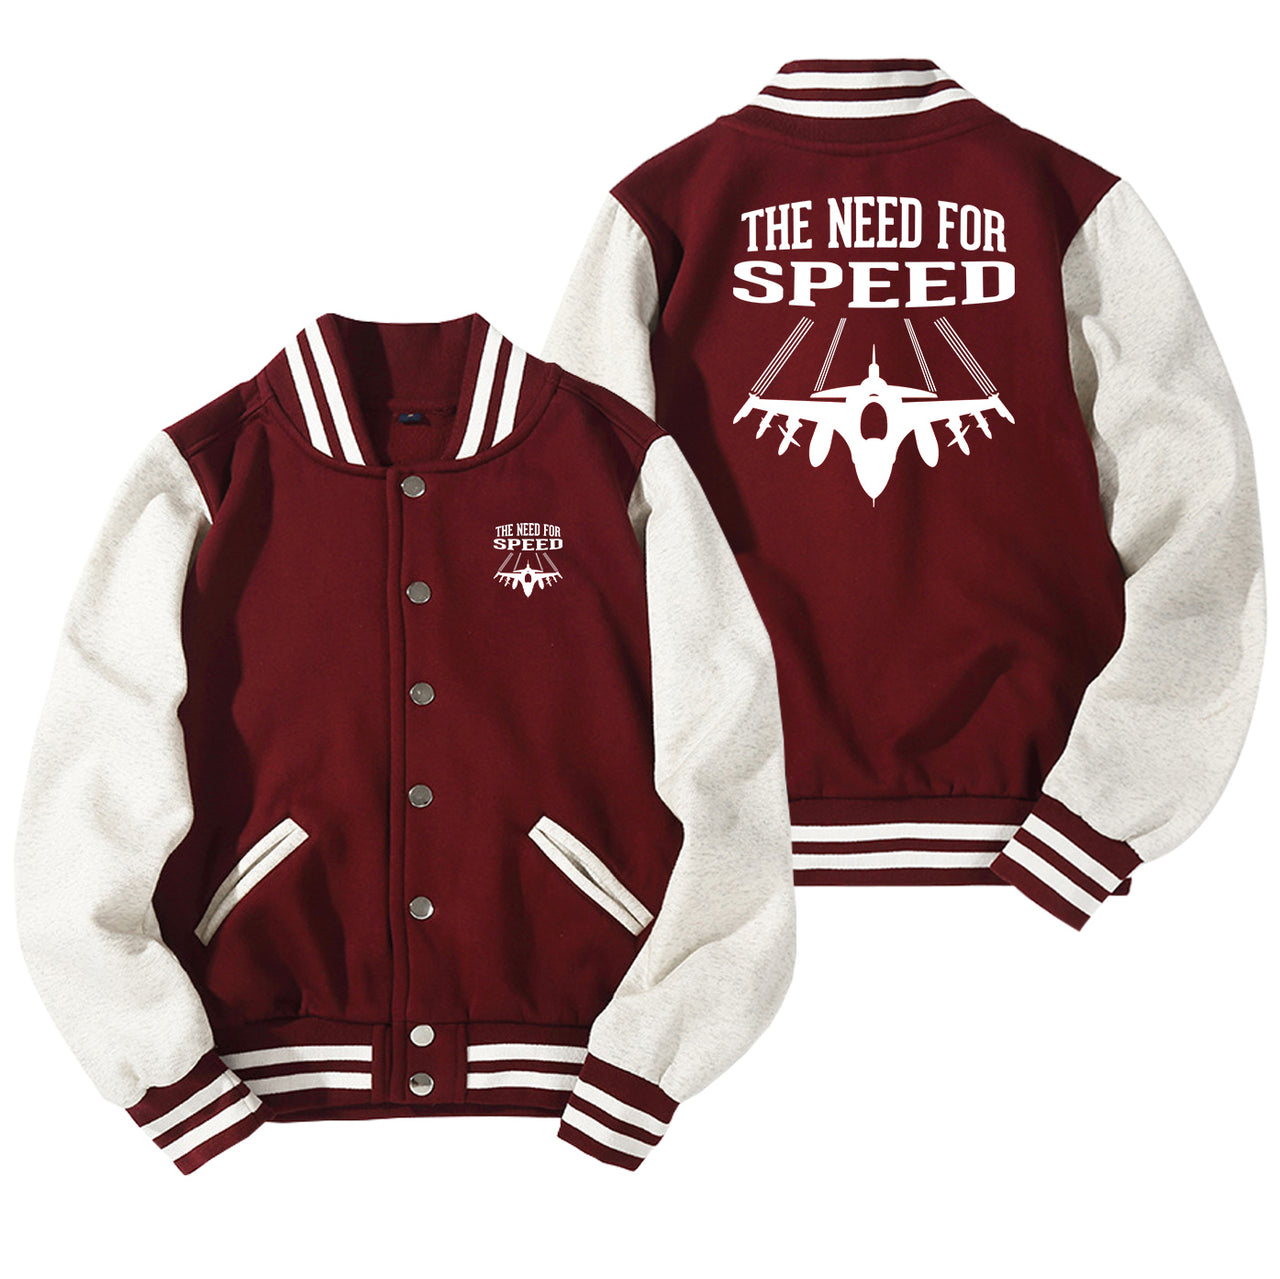 The Need For Speed Designed Baseball Style Jackets